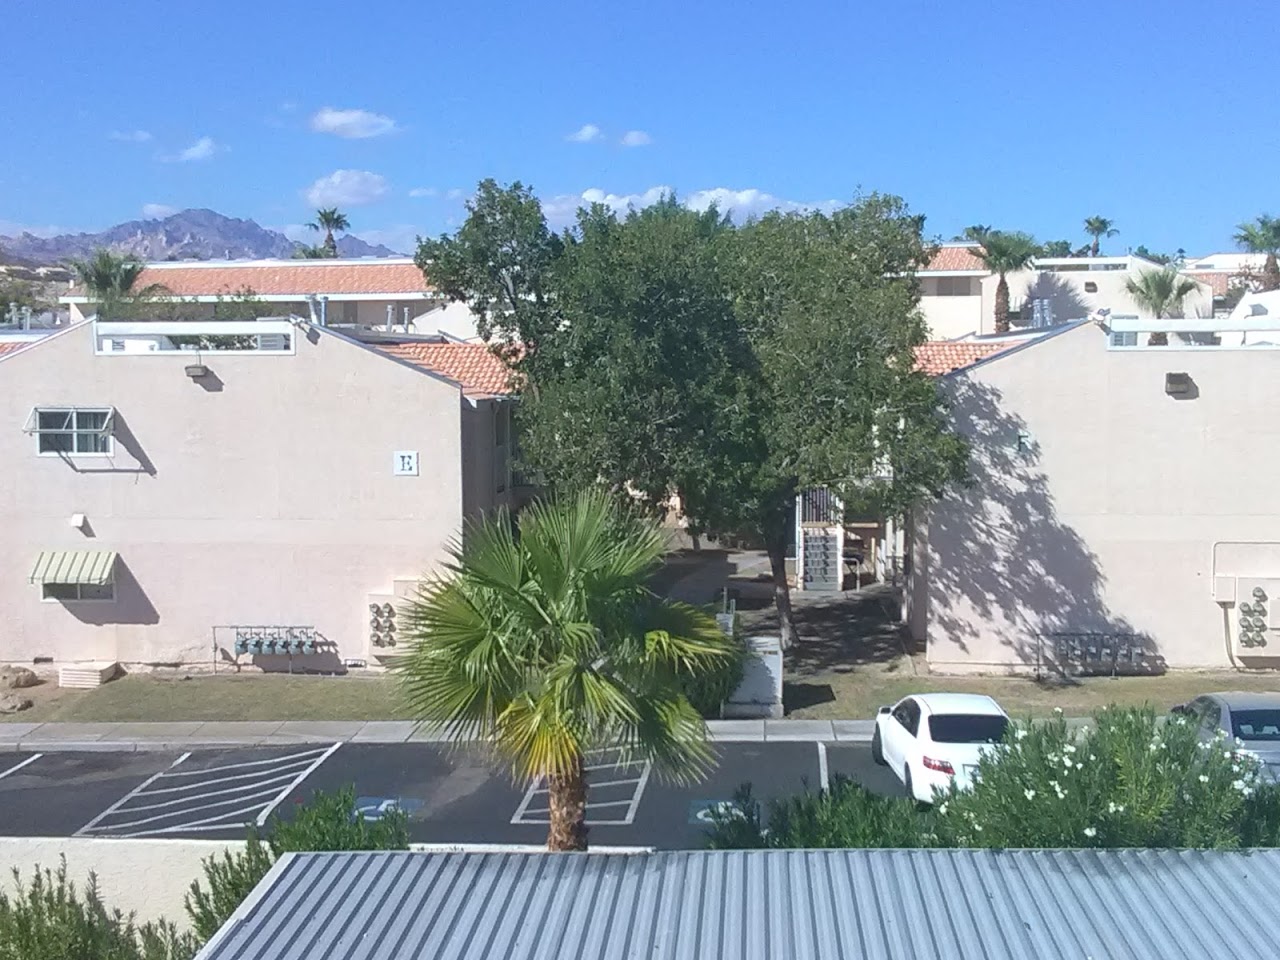 Photo of RIVERWOOD VILLAGE. Affordable housing located at 1705 CAL EDISON DR LAUGHLIN, NV 89029